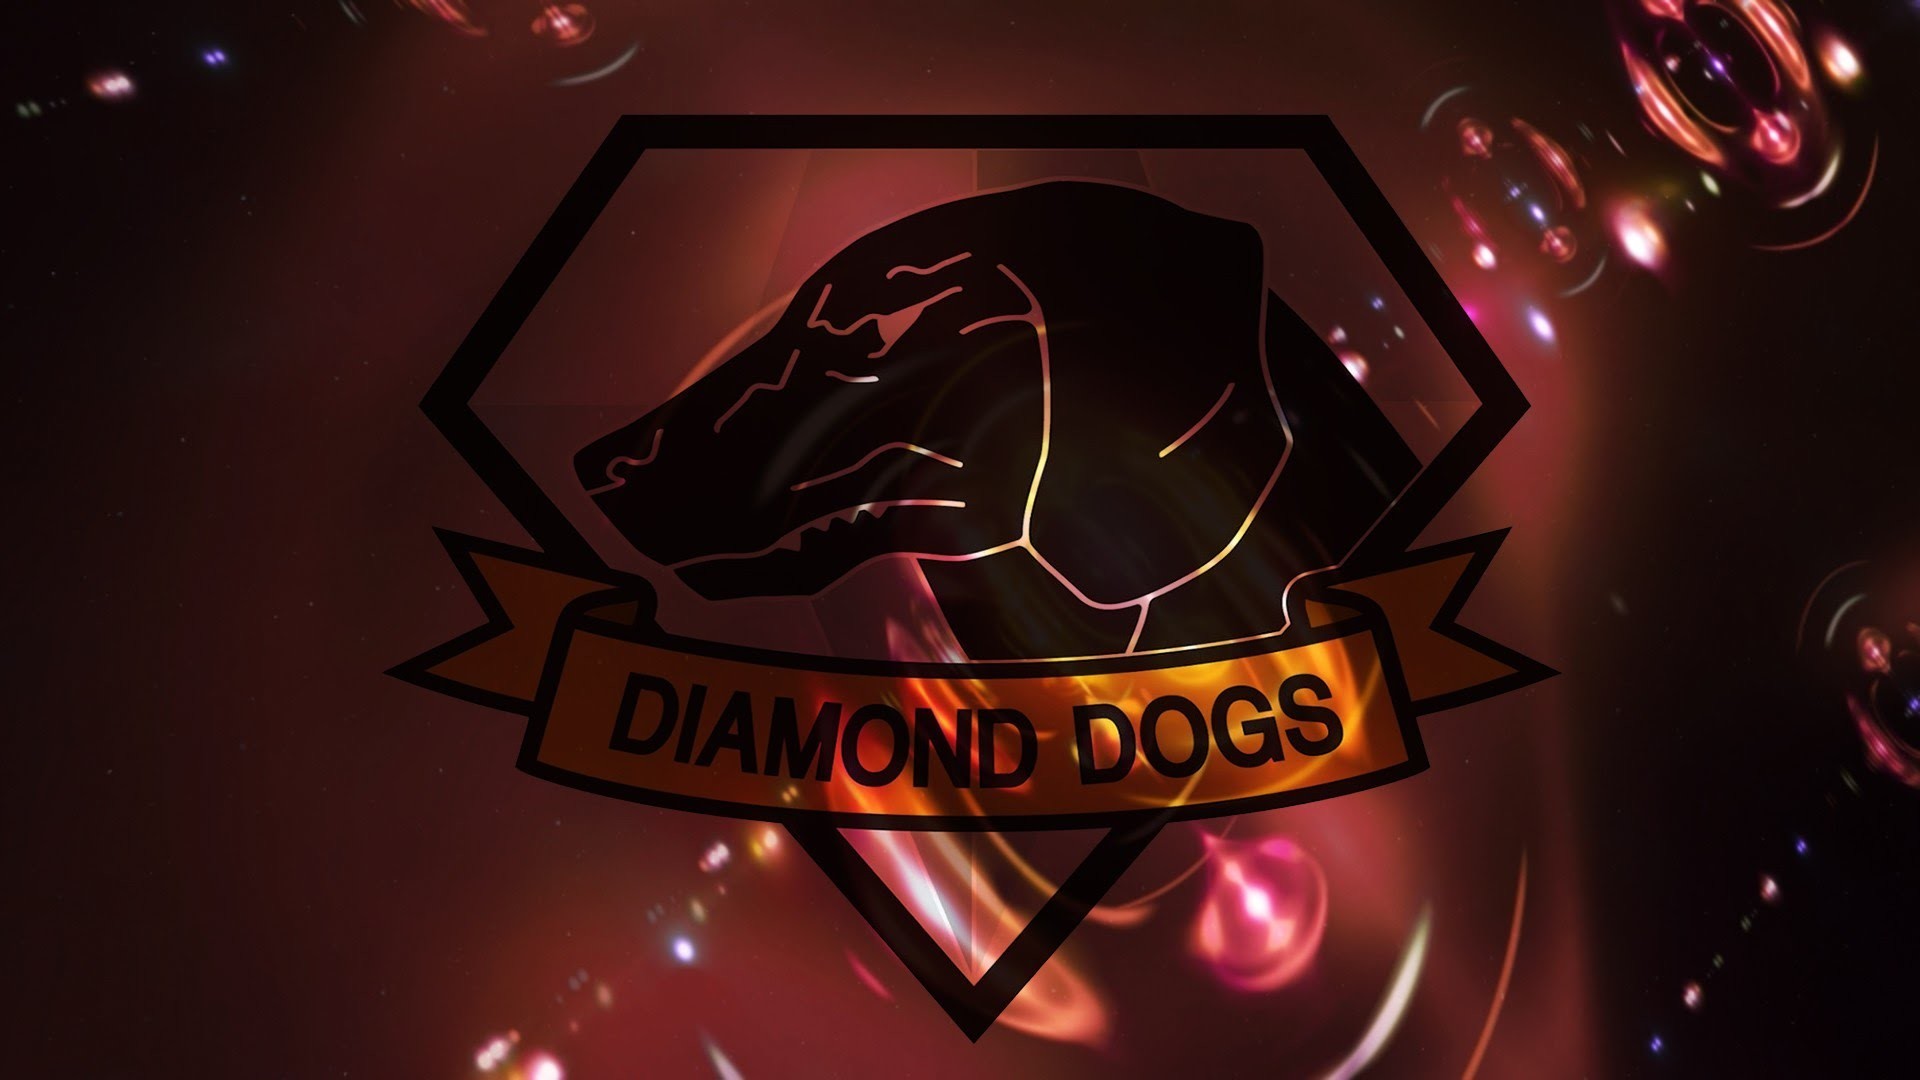 1920x1080 Metal Gear Solid V: The Phantom Pain l Episodio 43 l We are Diamond Dogs